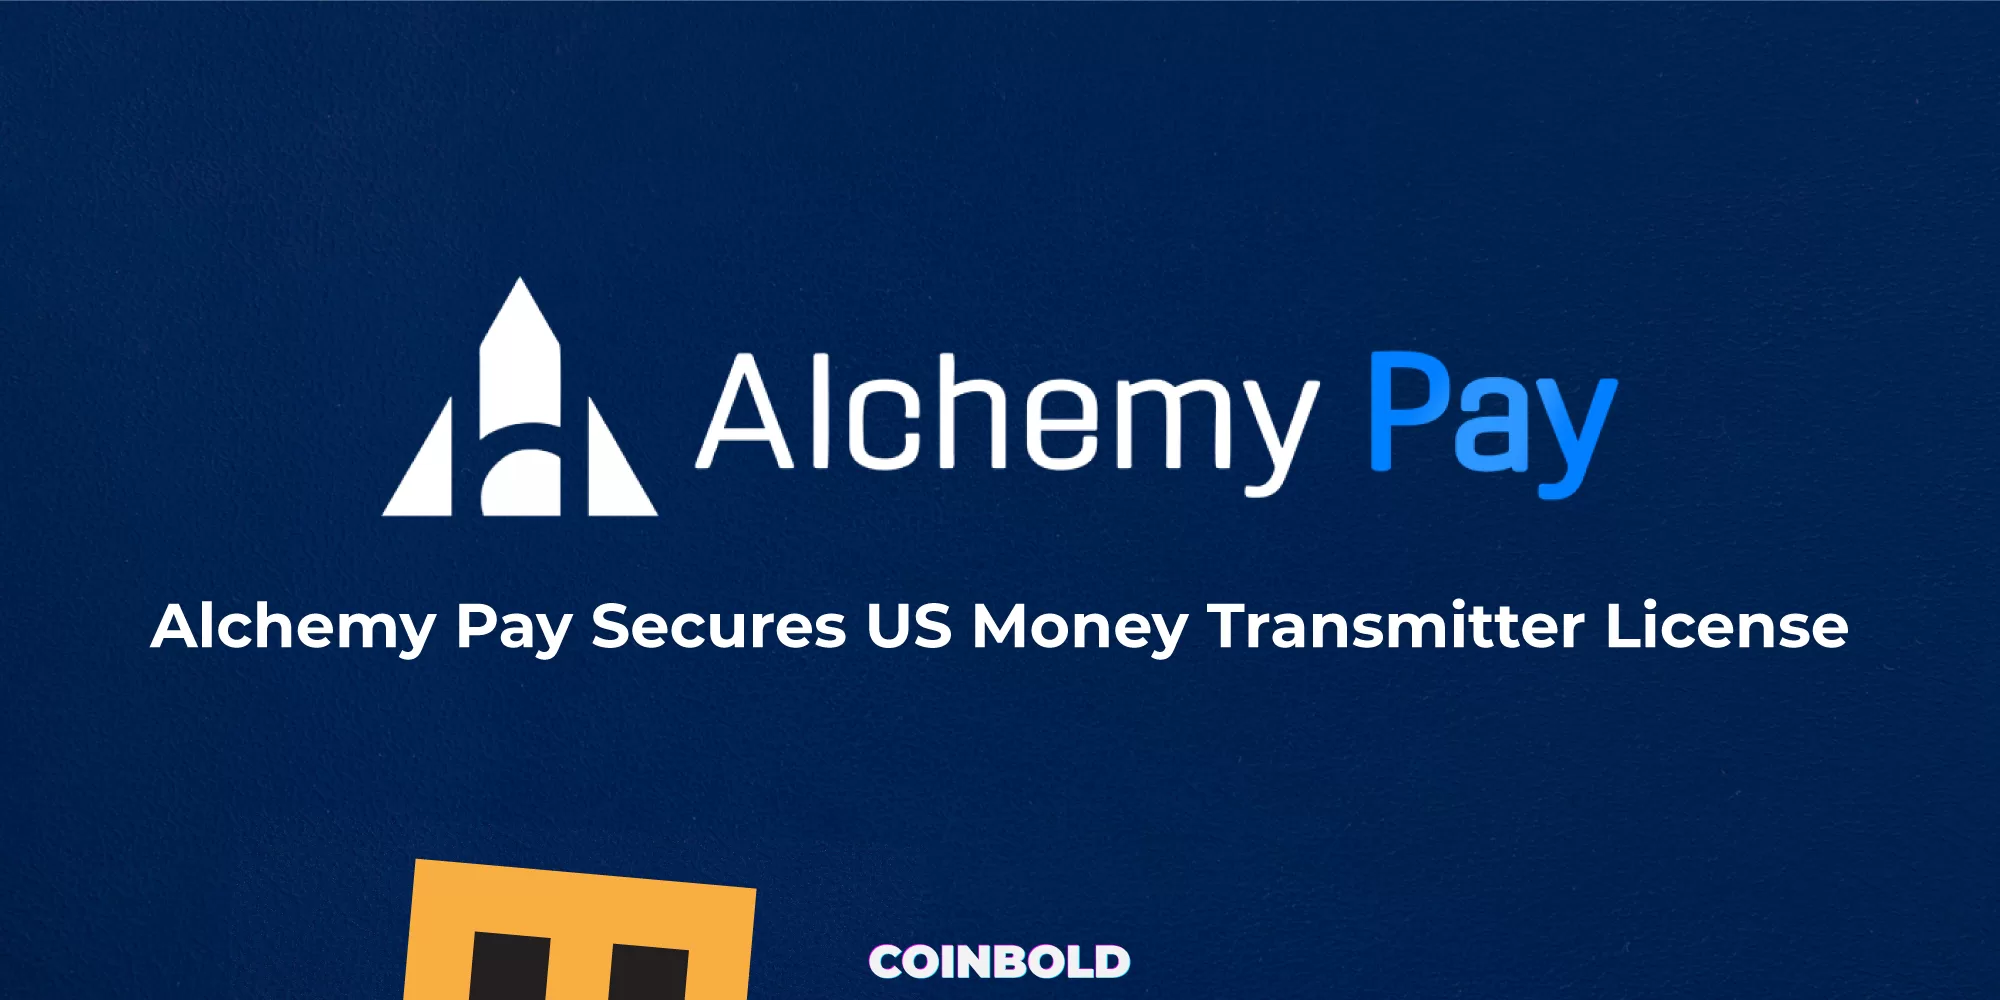 Alchemy Pay Secures US Money Transmitter License